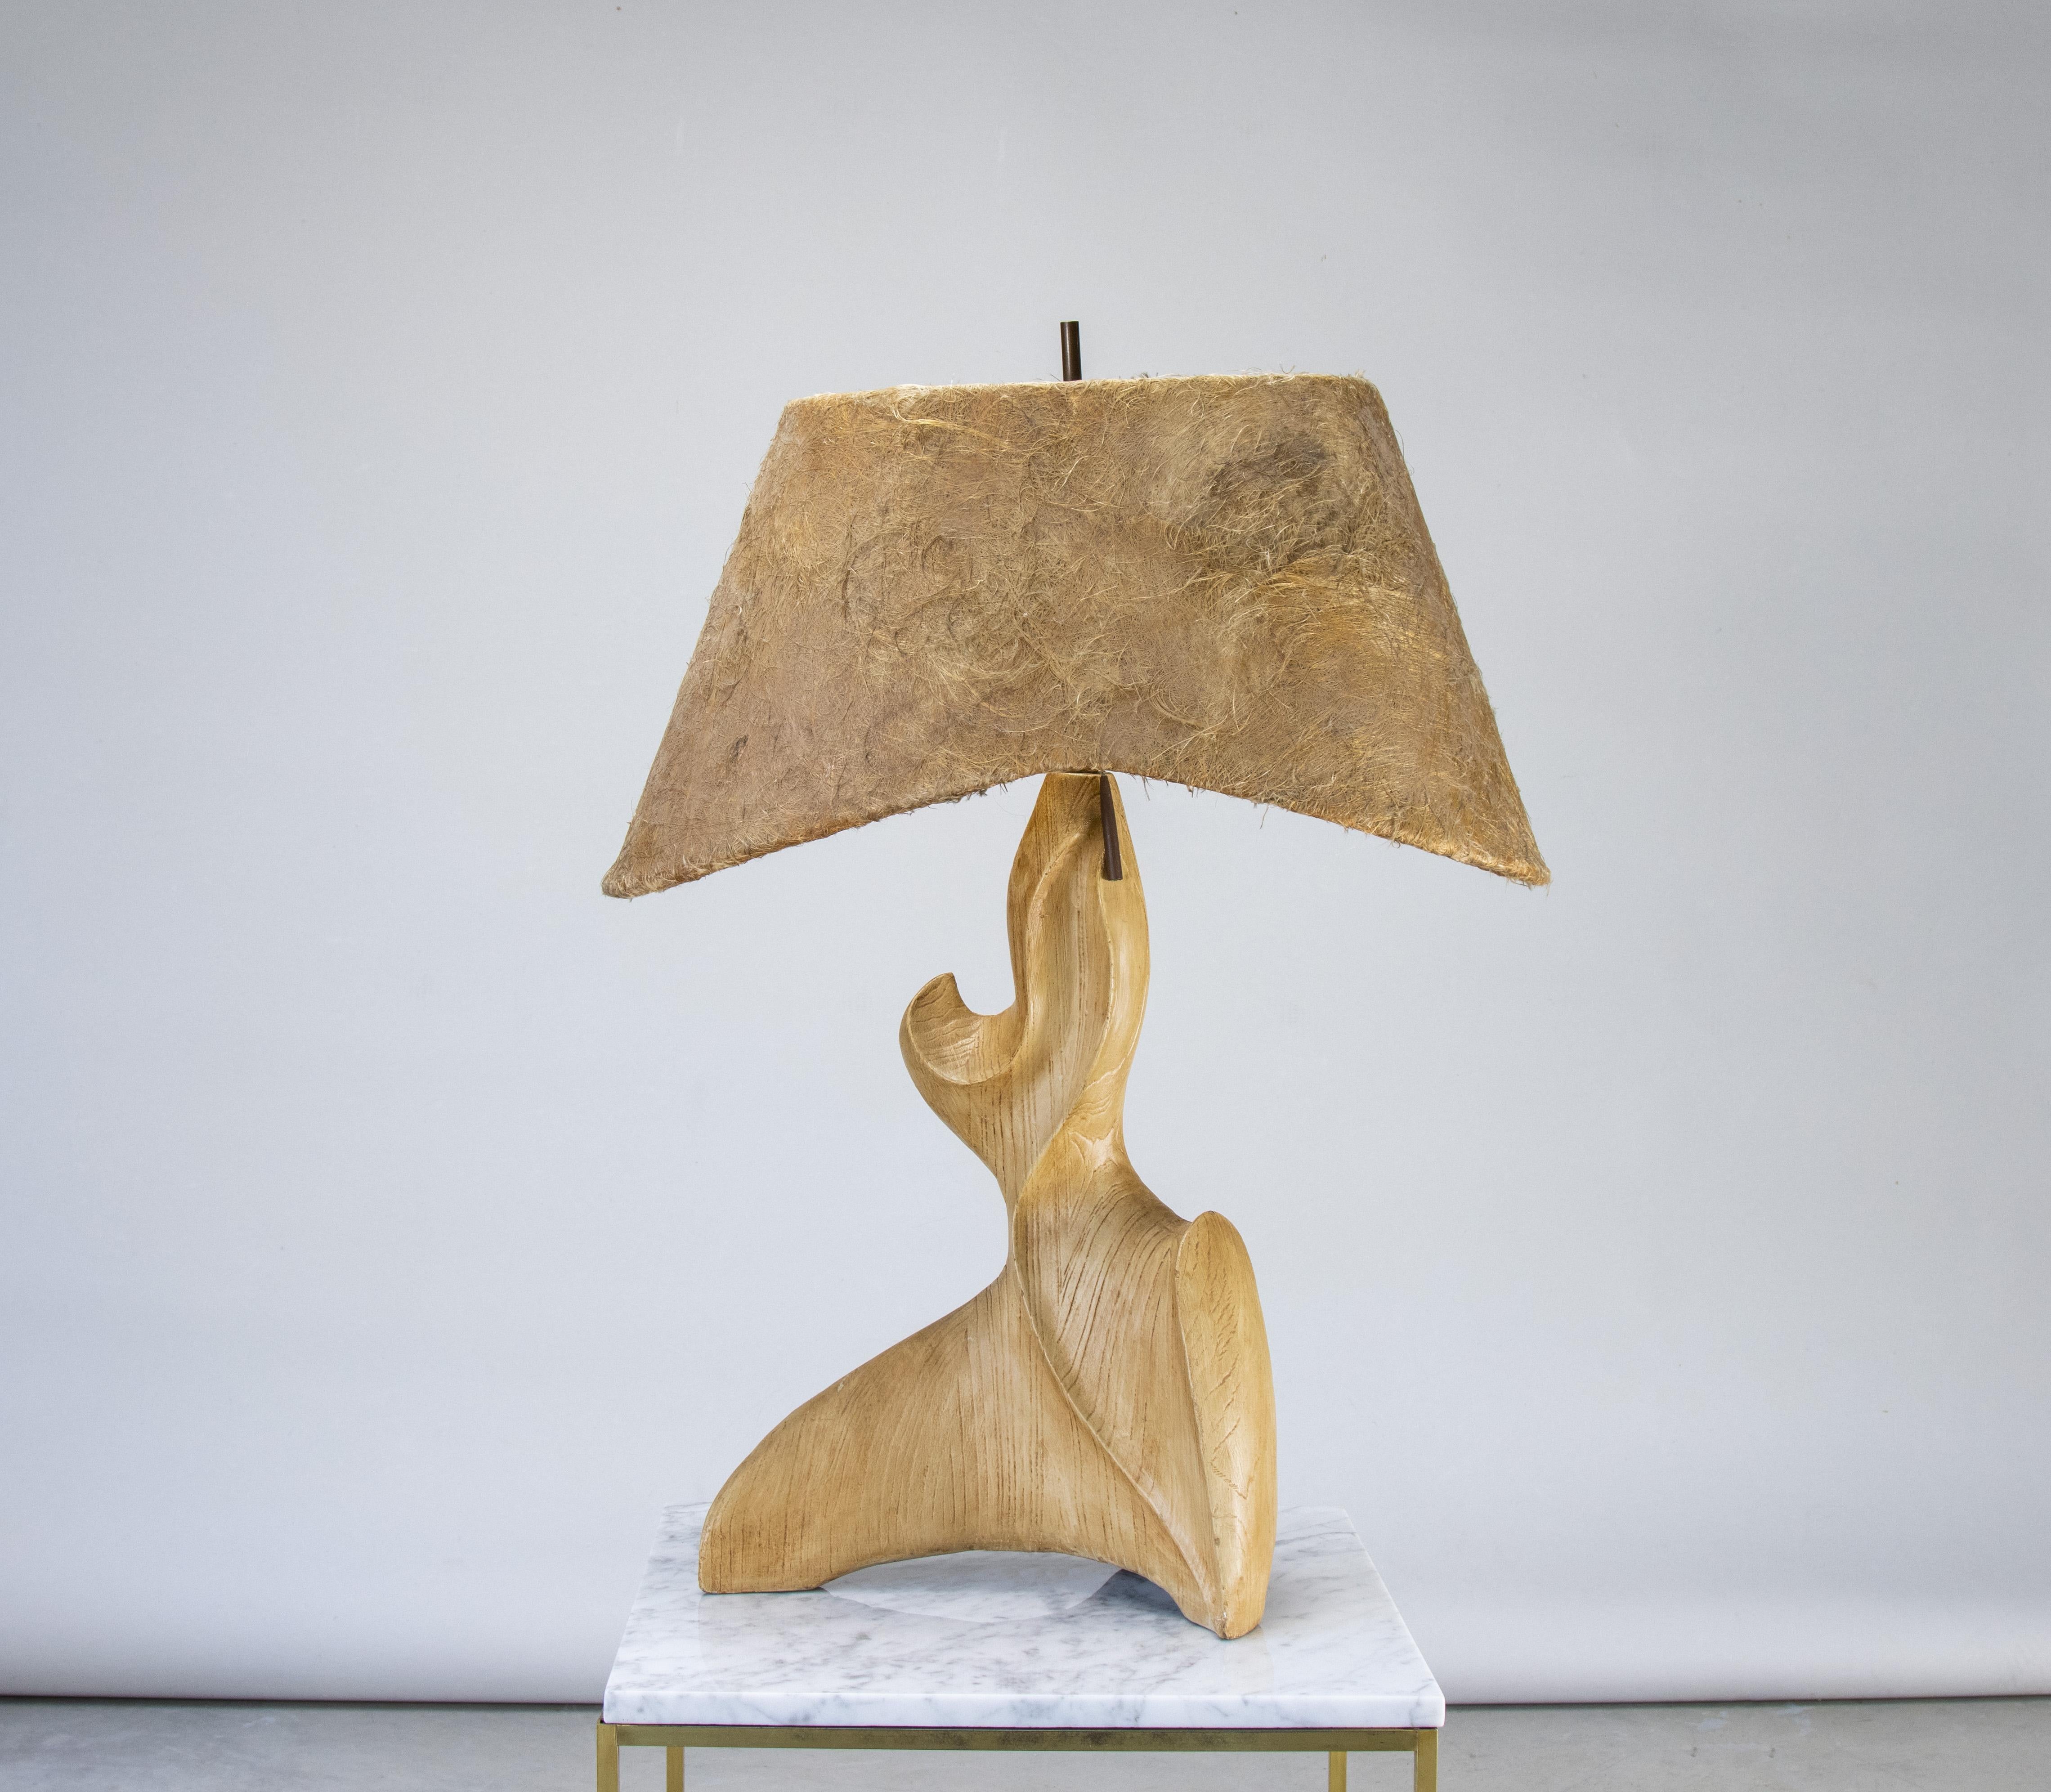 A truly unique organic shaped table lamp circa 1950’s.  Large at 33.5” tall and 25.5” wide.  The lamp is made of heavy ceramic with a wood textured design. The horsehair shade with curved edges adds a great texture.  